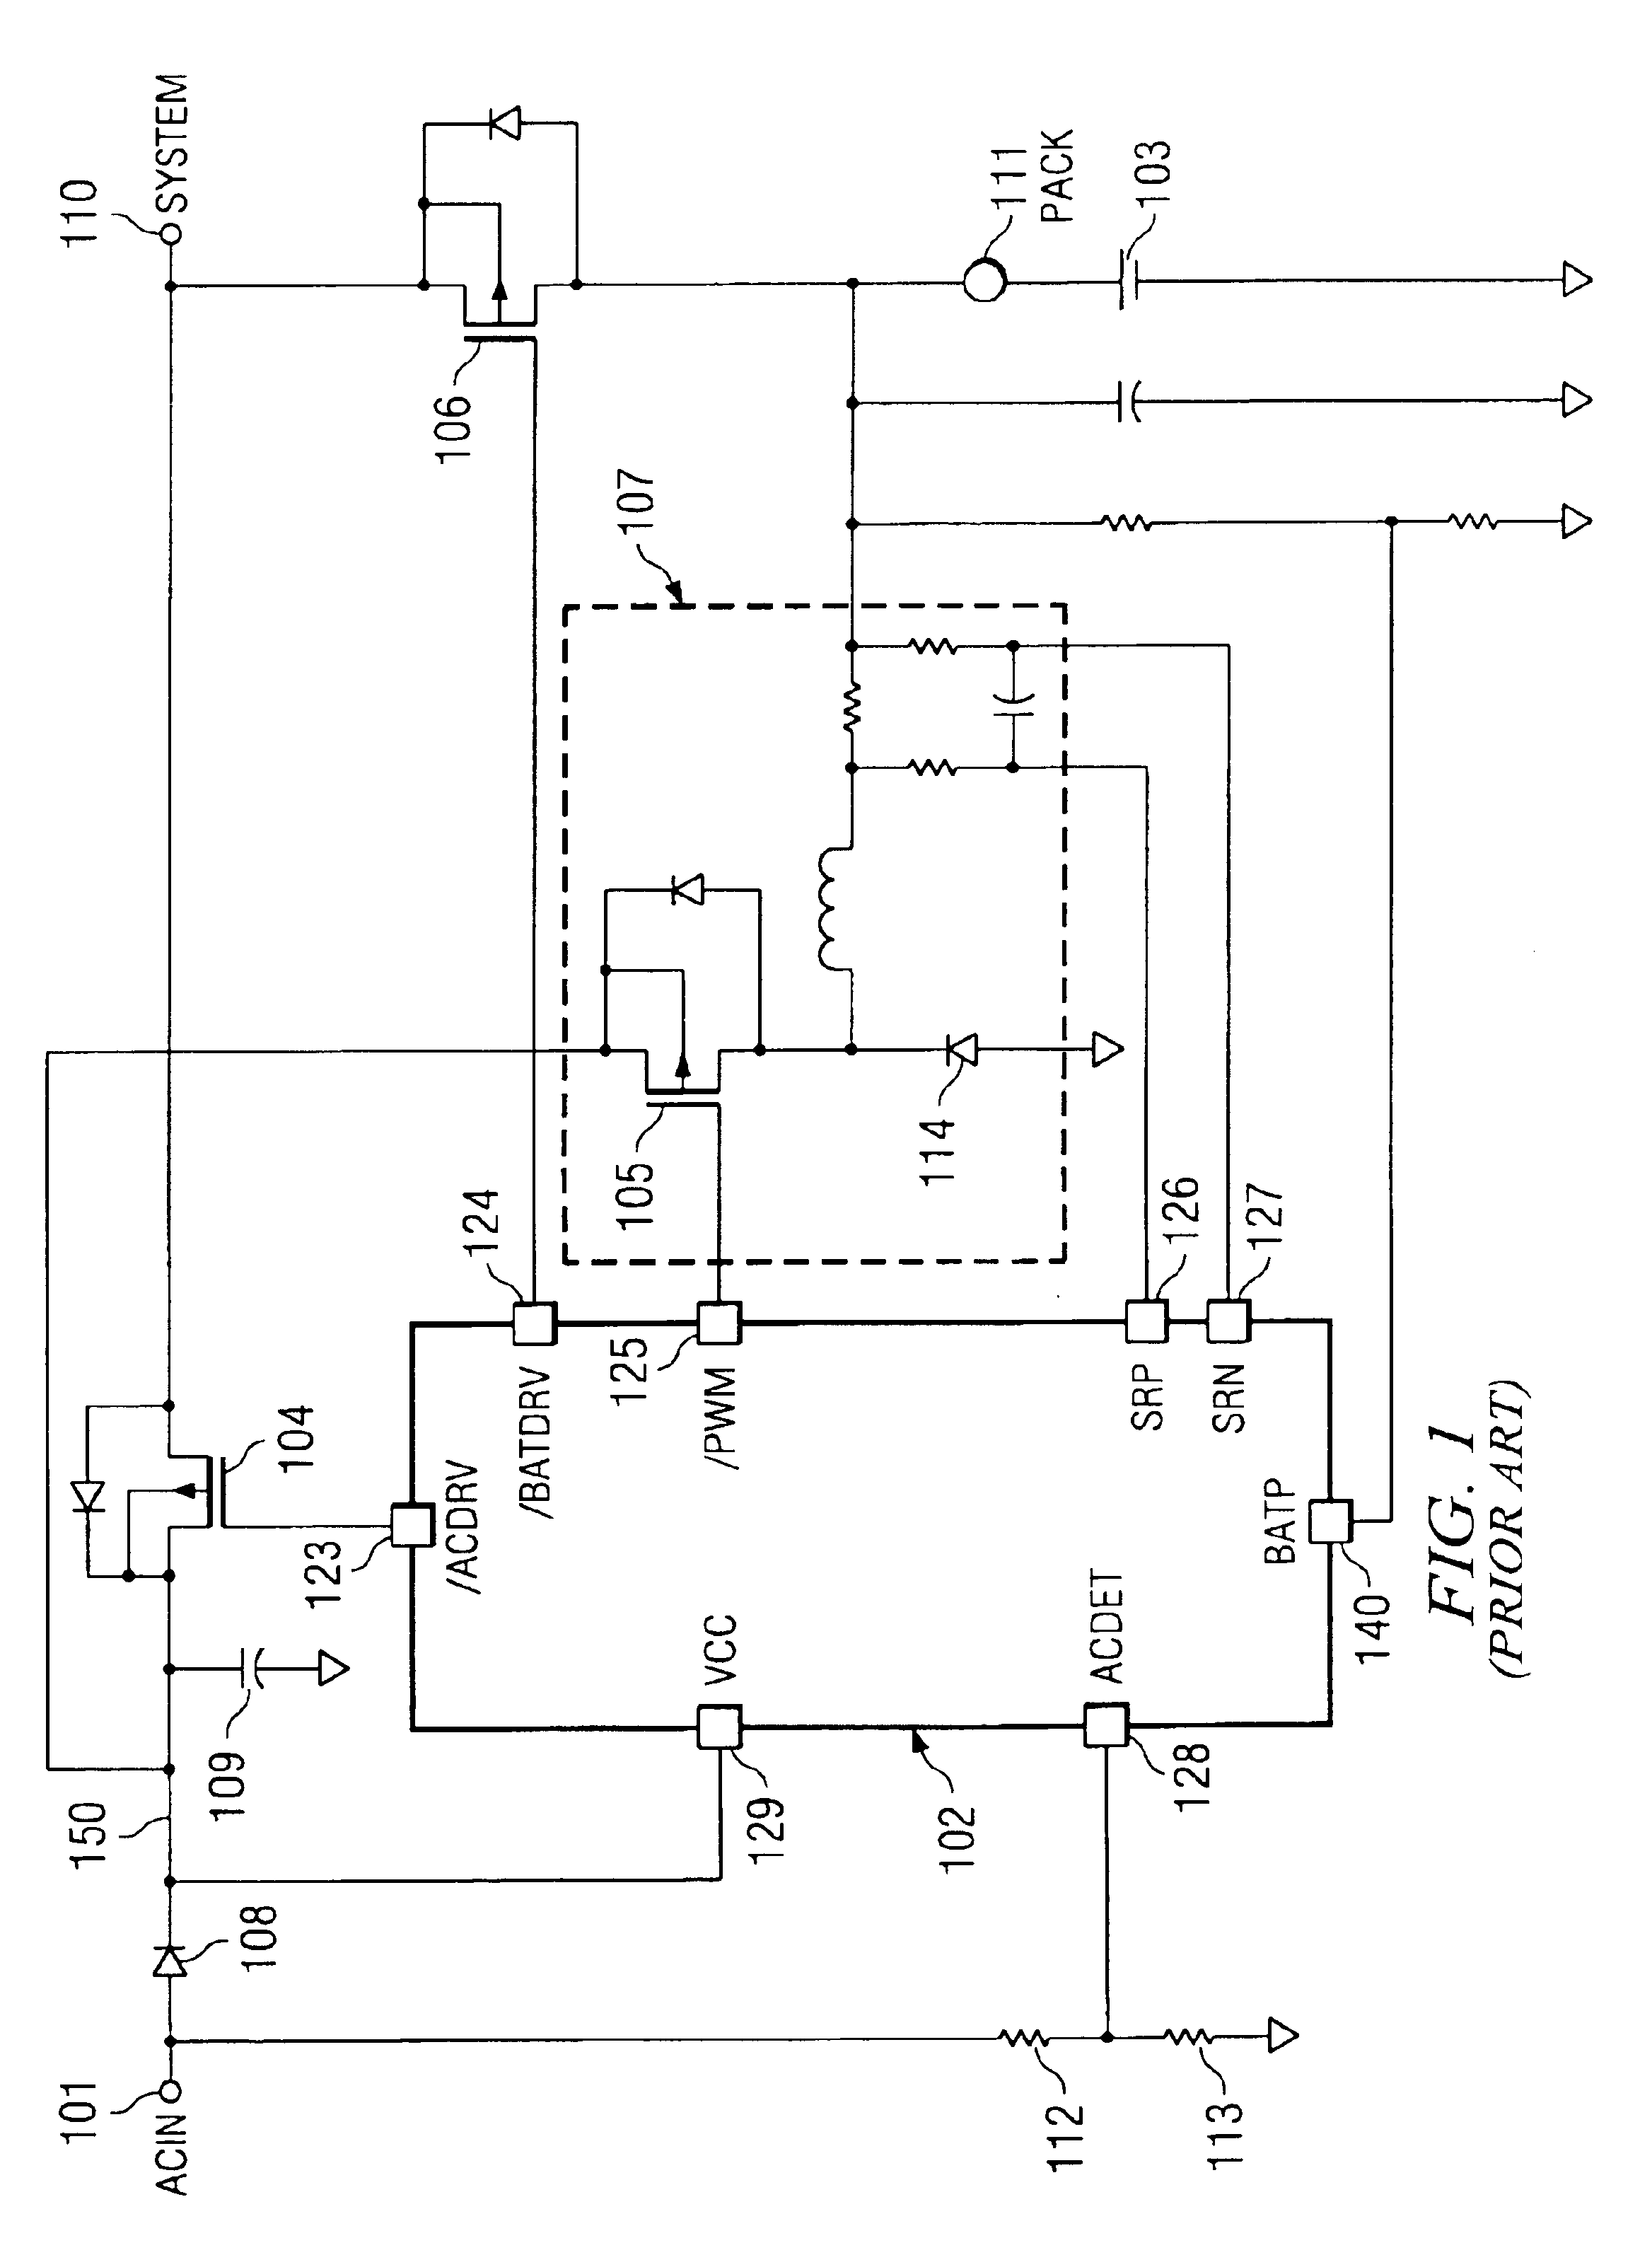 Architecture for switching between an external and internal power source